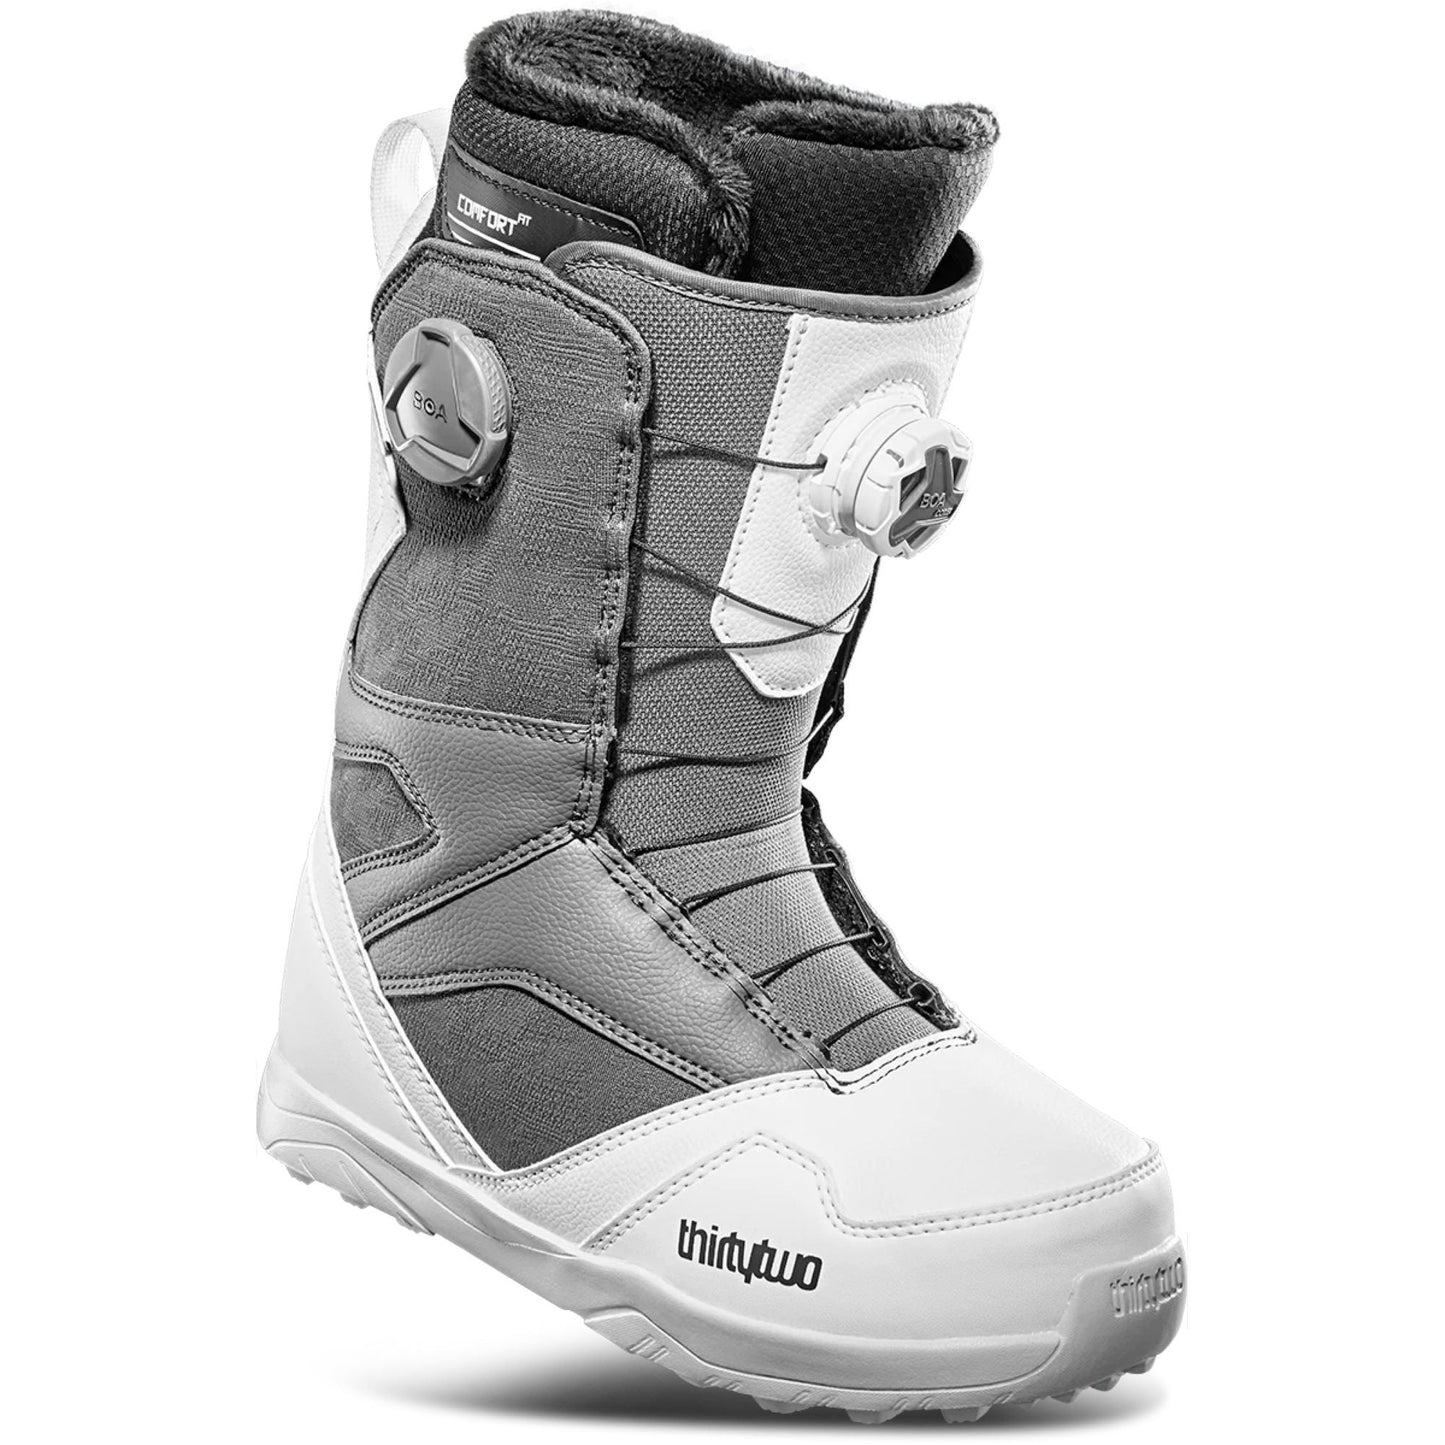 ThirtyTwo Women's STW Double BOA Snowboard Boots - OpenBox White Camo Snowboard Boots